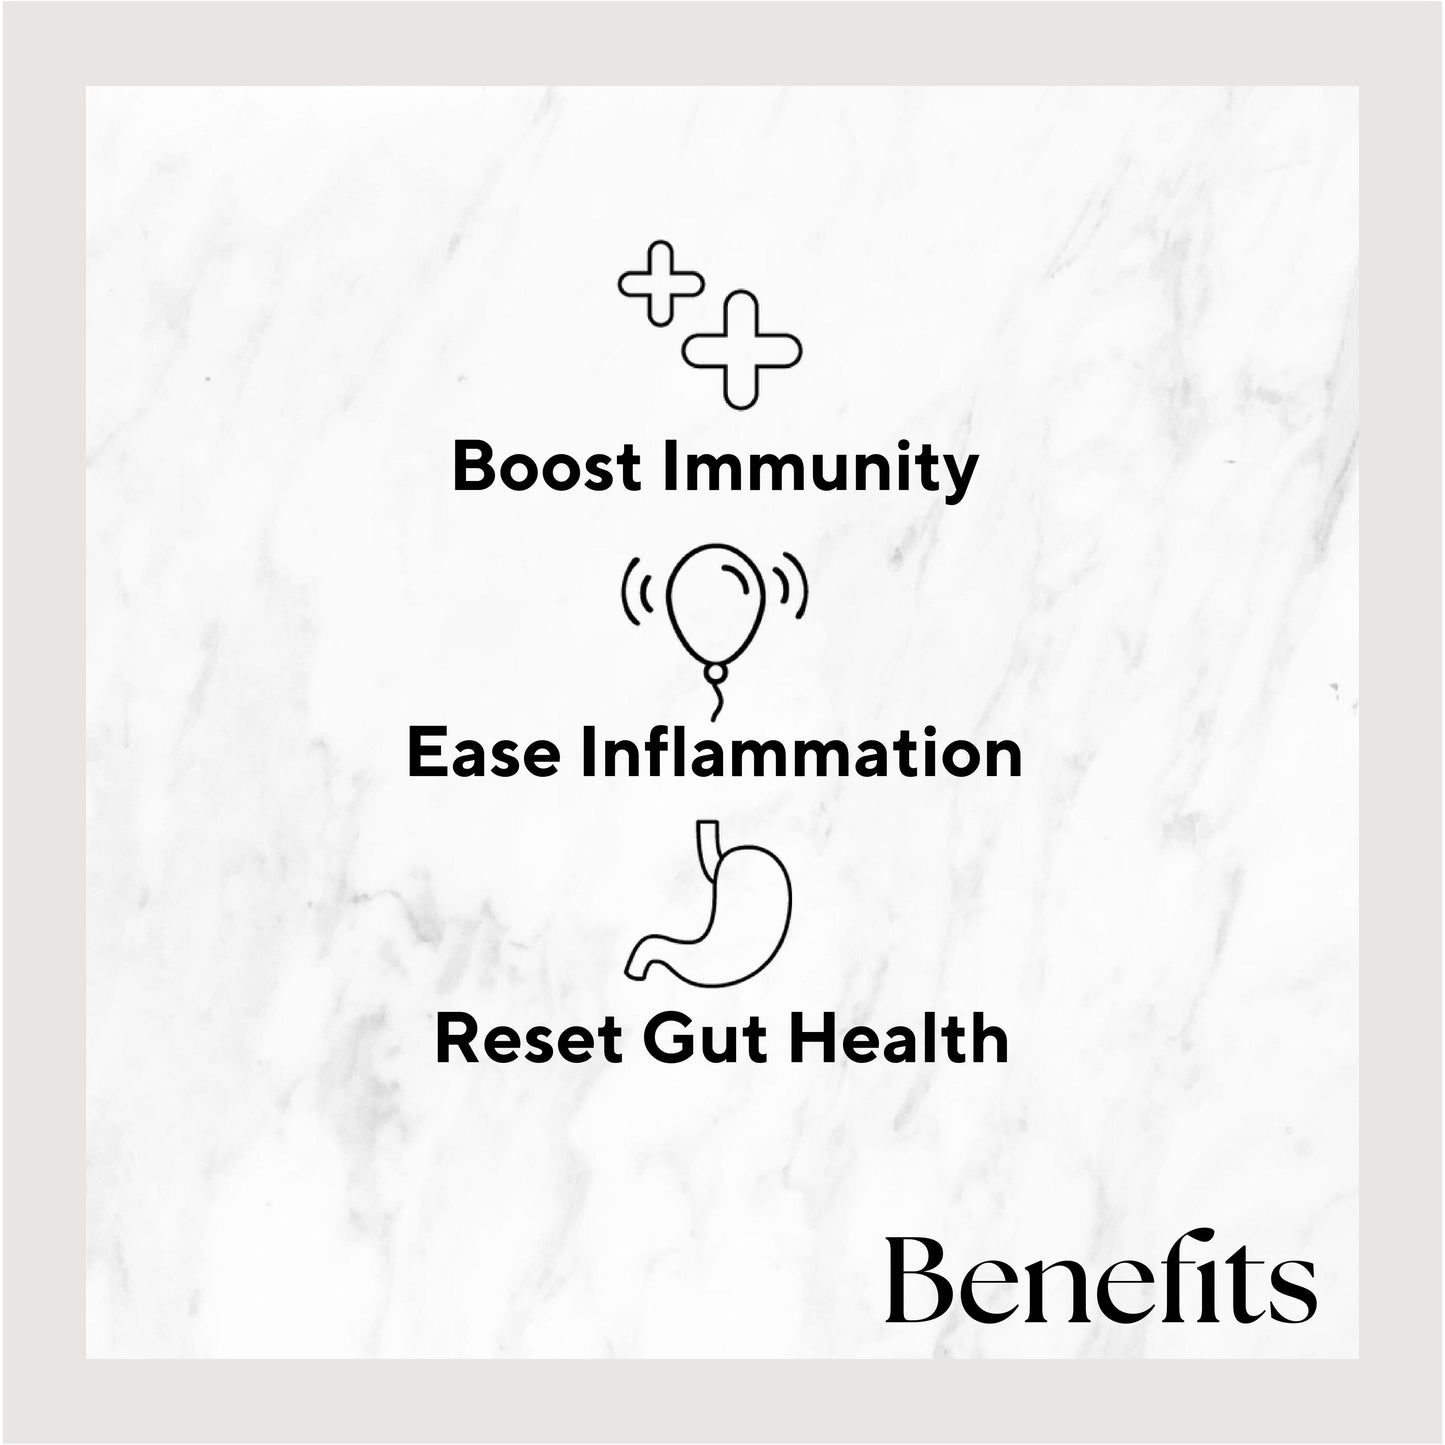 Infographic listing benefits of the product. Benefits include: Boost Immunity, Ease Inflammation and Reset Gut Health.